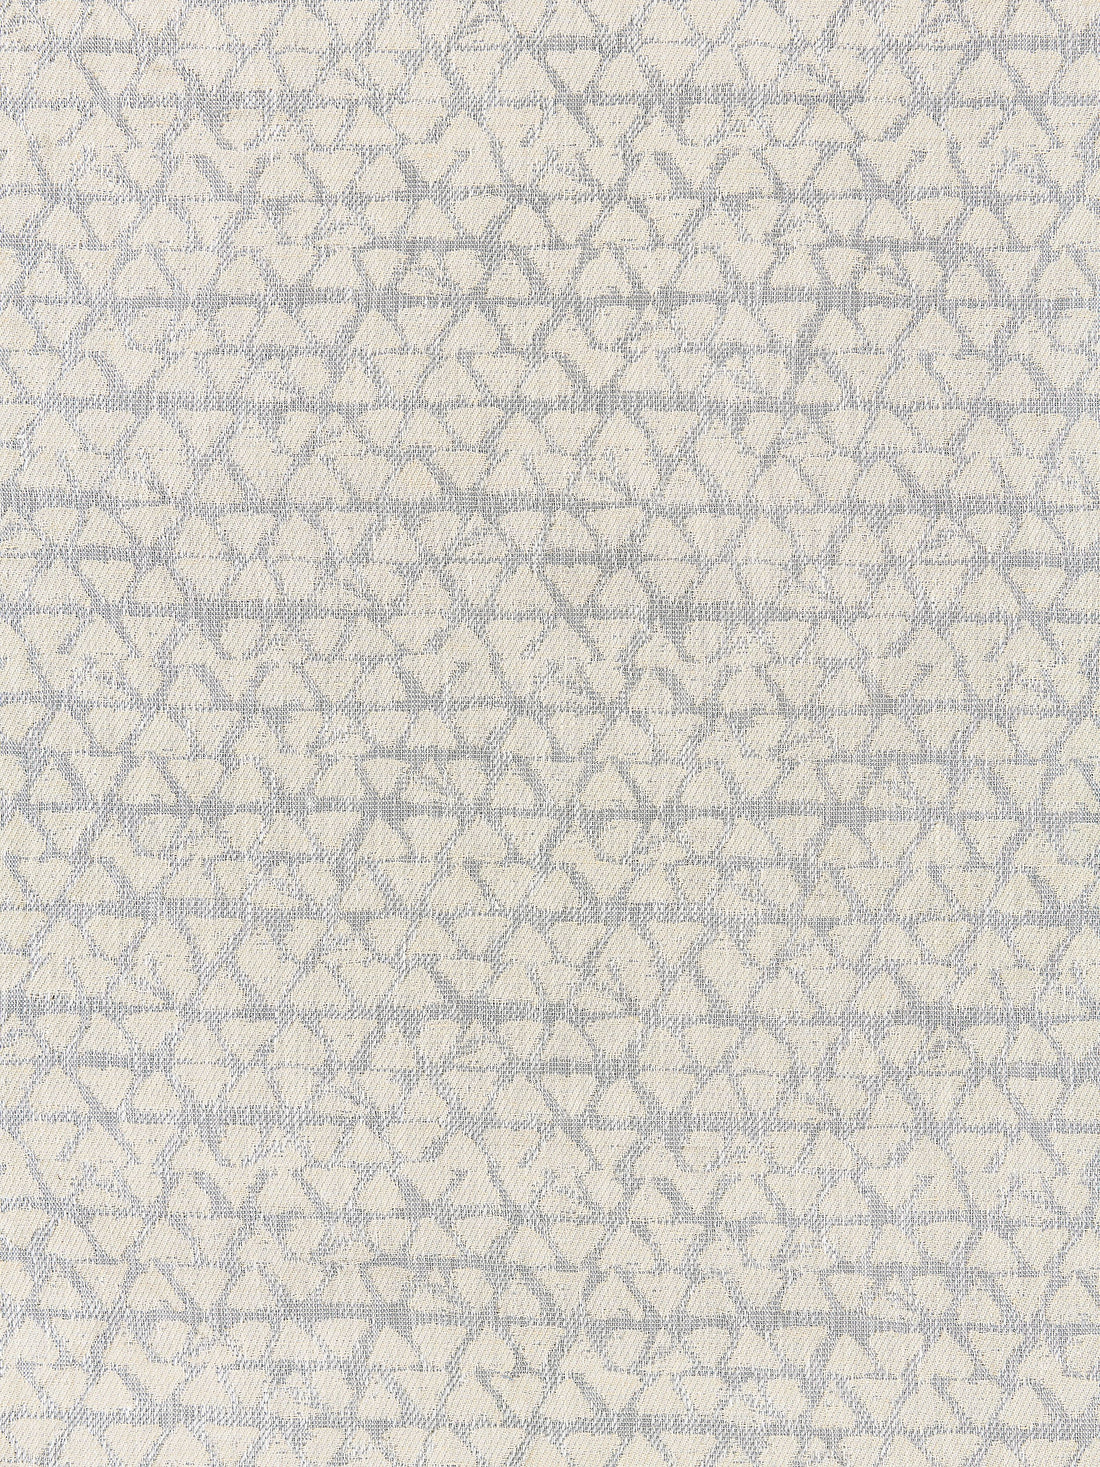 Kanoko fabric in mineral color - pattern number SC 000227148 - by Scalamandre in the Scalamandre Fabrics Book 1 collection